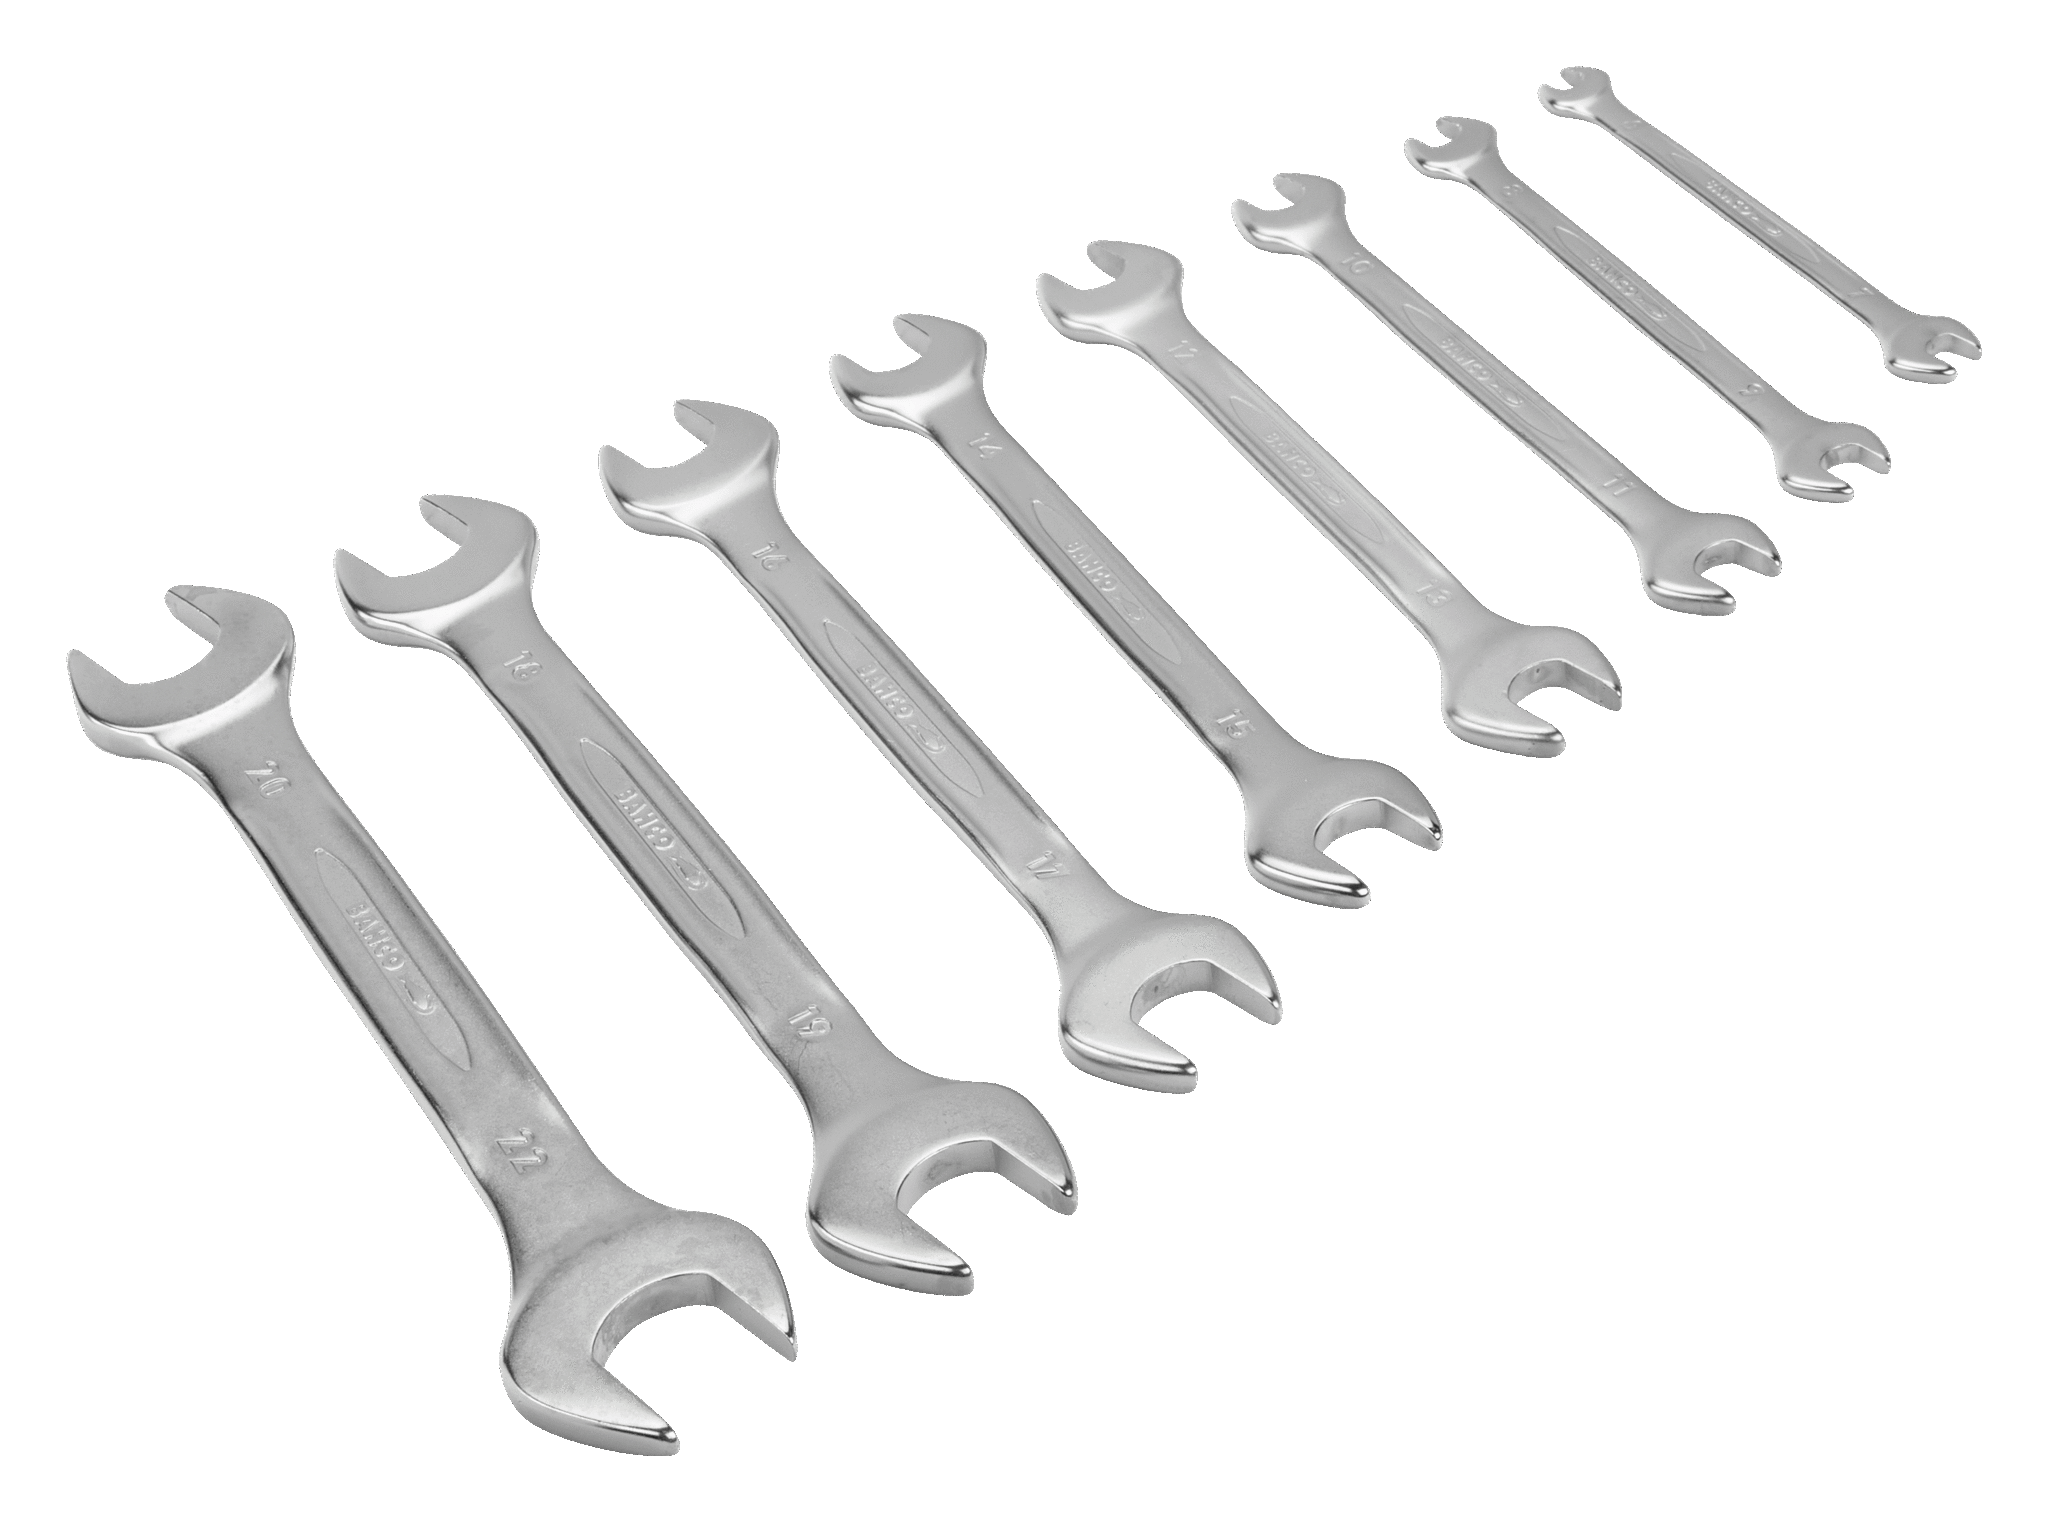 Double Open-Ended Short Shaft Spanner Wrenches Metric 